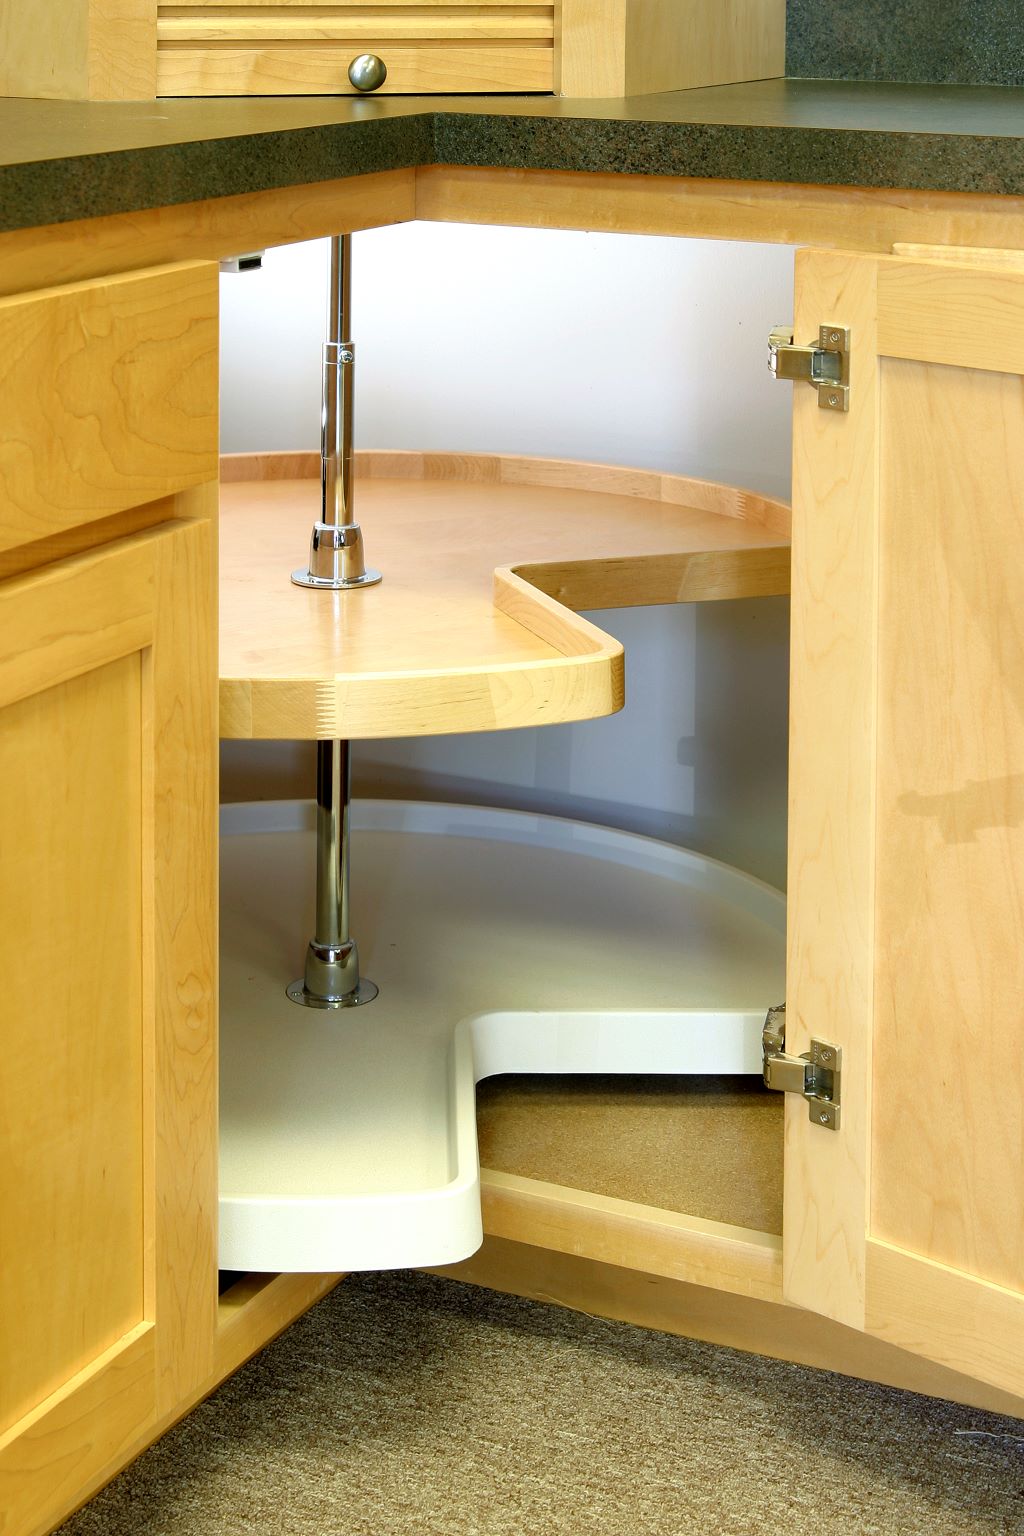 The Lazy Susan designed with rotating shelves, makes it easy to access items stored at the back of the cabinet without having to awkwardly reach or move items around.